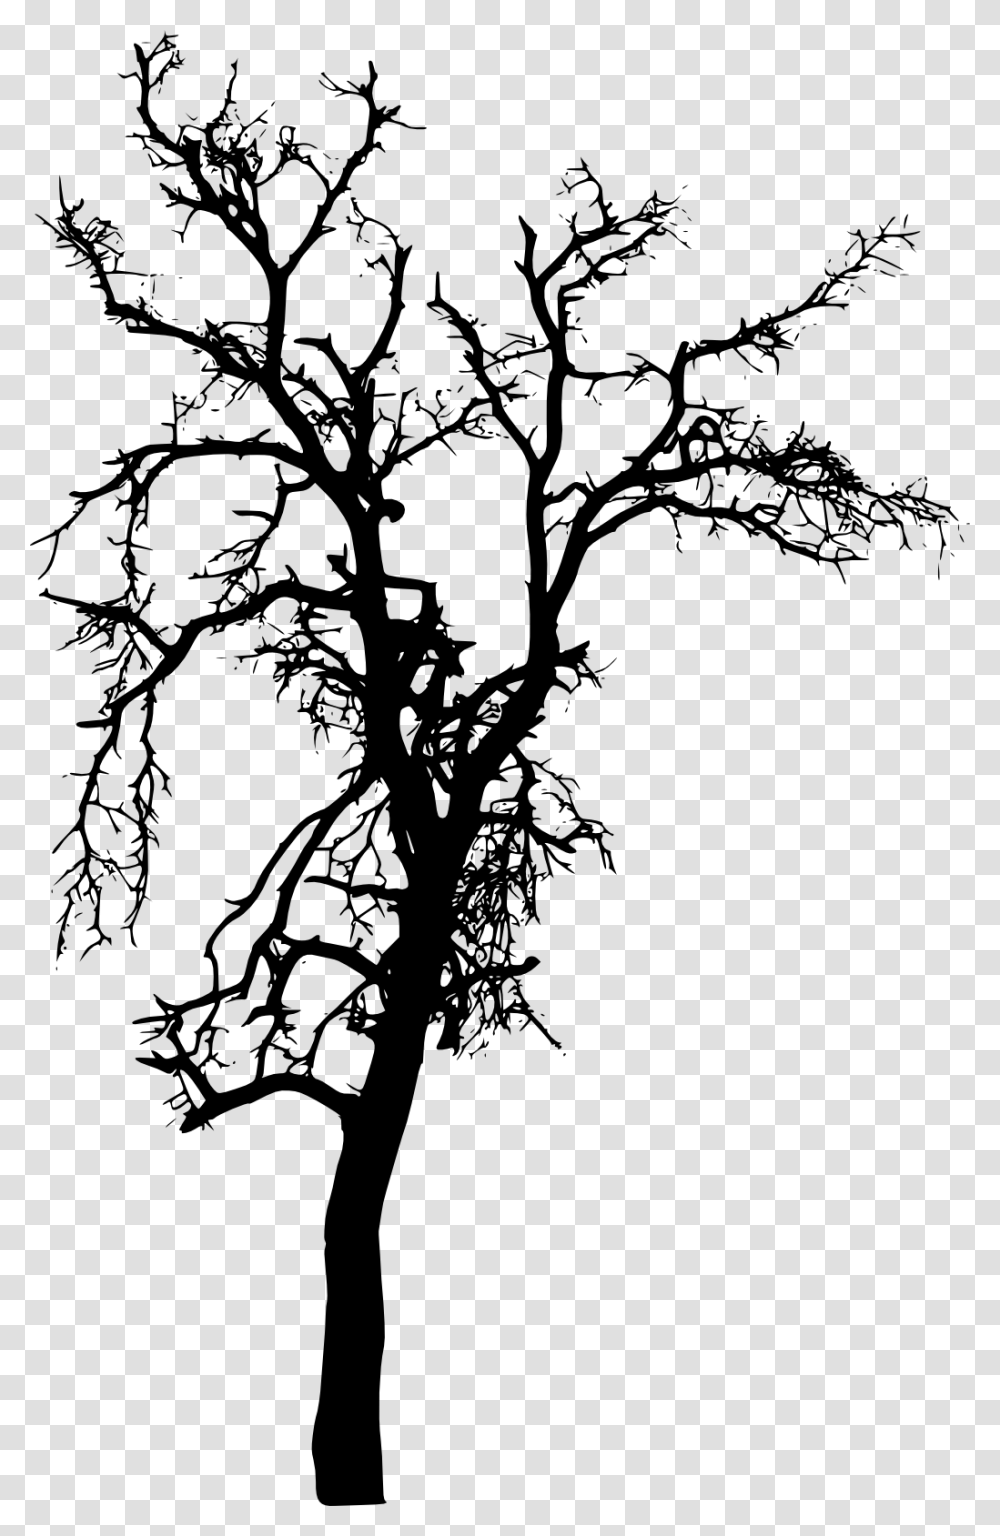 Tree Plant Branch Silhouette Silhouette Tree Images, Root, Cross, Tree Trunk Transparent Png